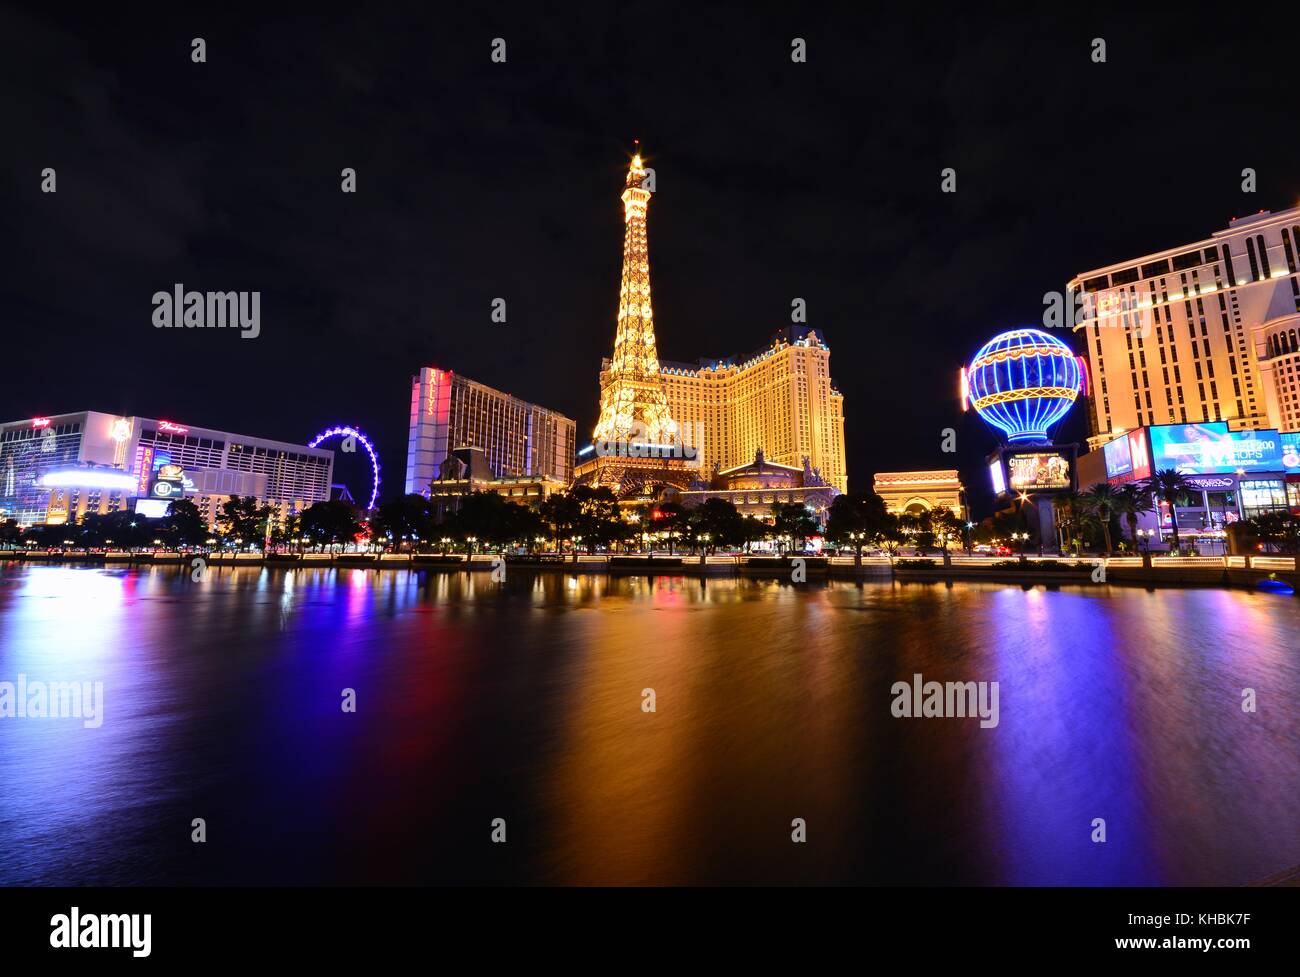 LAS VEGAS, NEVADA - JULY 25, 2017: View of the Eiffel Tower and Paris balloon of Paris Resort Casino and hotels in Las Vegas on July 25, 2017. Stock Photo